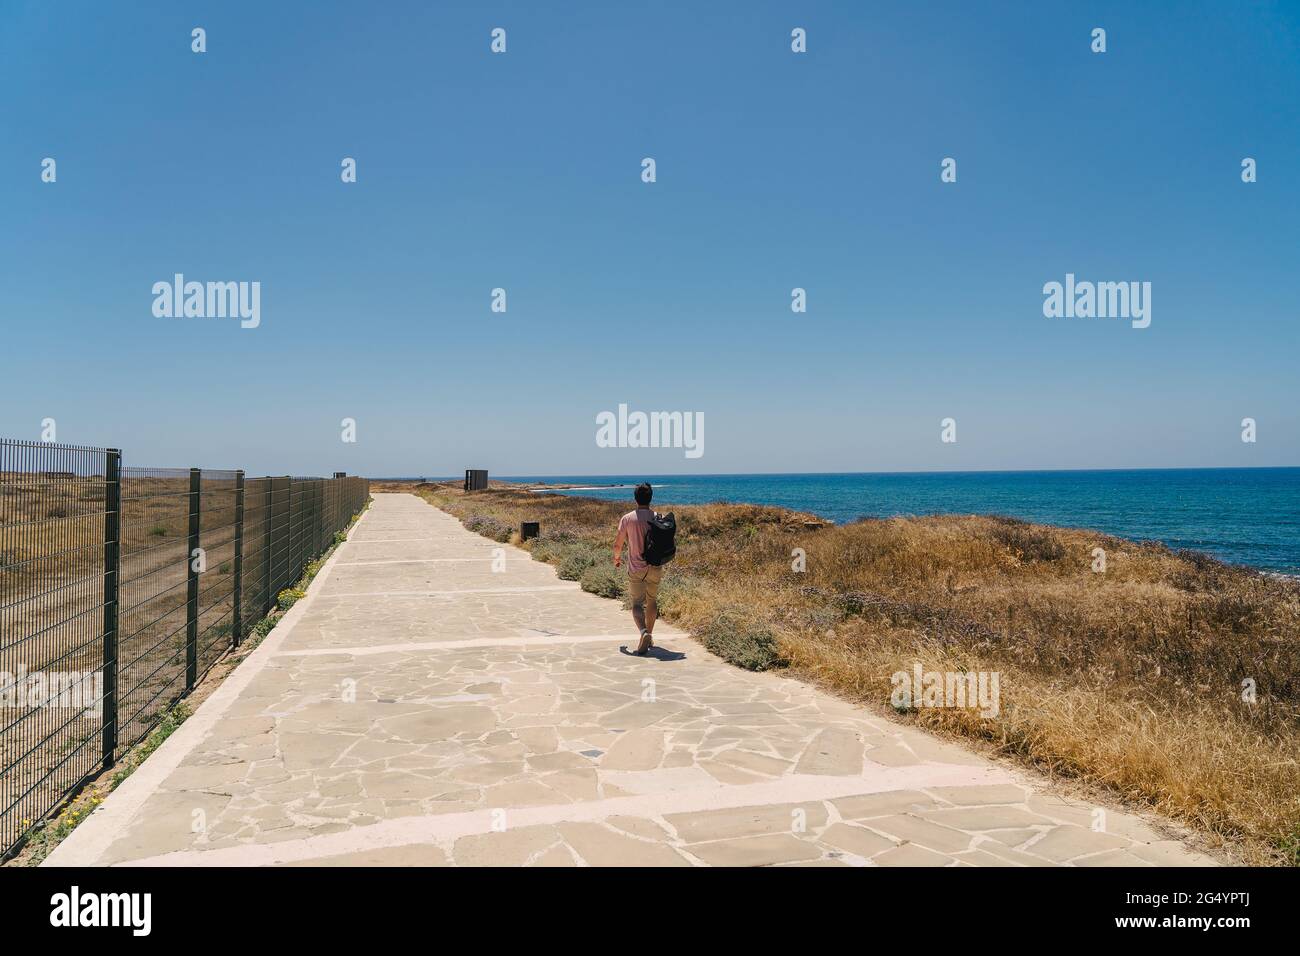 Coastal broadwalk along mediterranean sea on island of cyprus in city of paphos. Traveler with backpack walks along walking path near seafront. Active Stock Photo